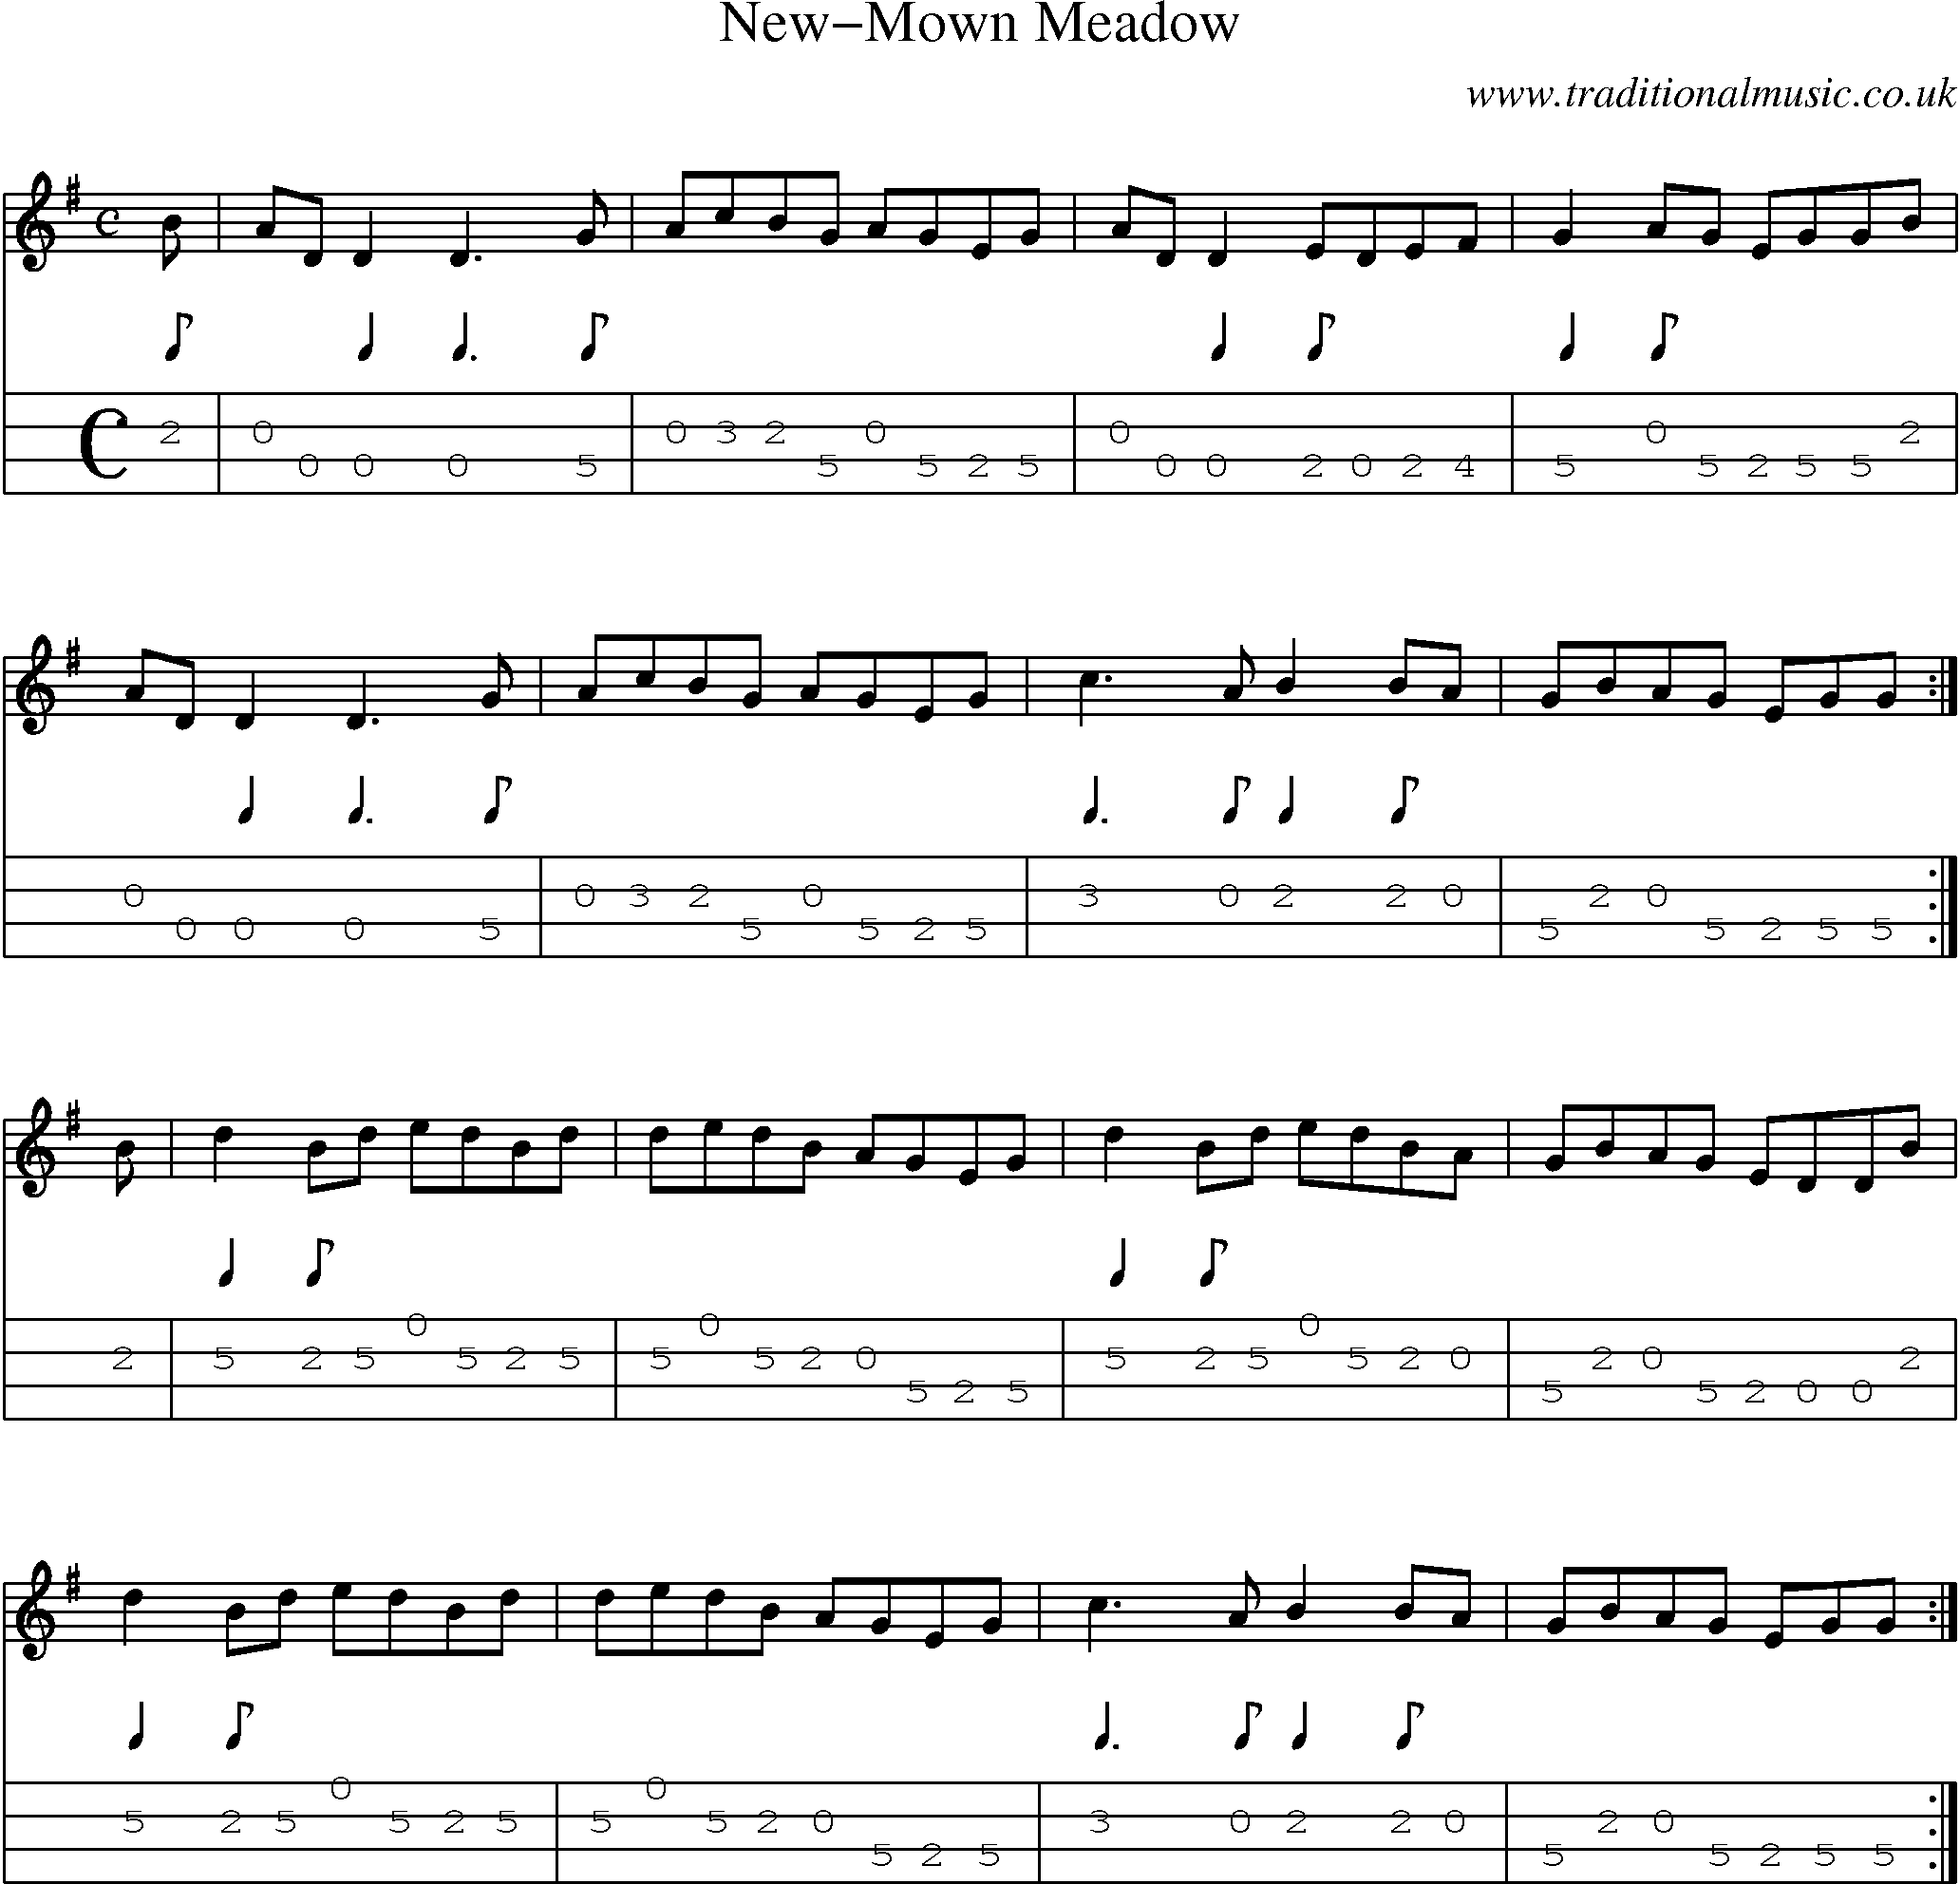 Music Score and Mandolin Tabs for Newmown Meadow